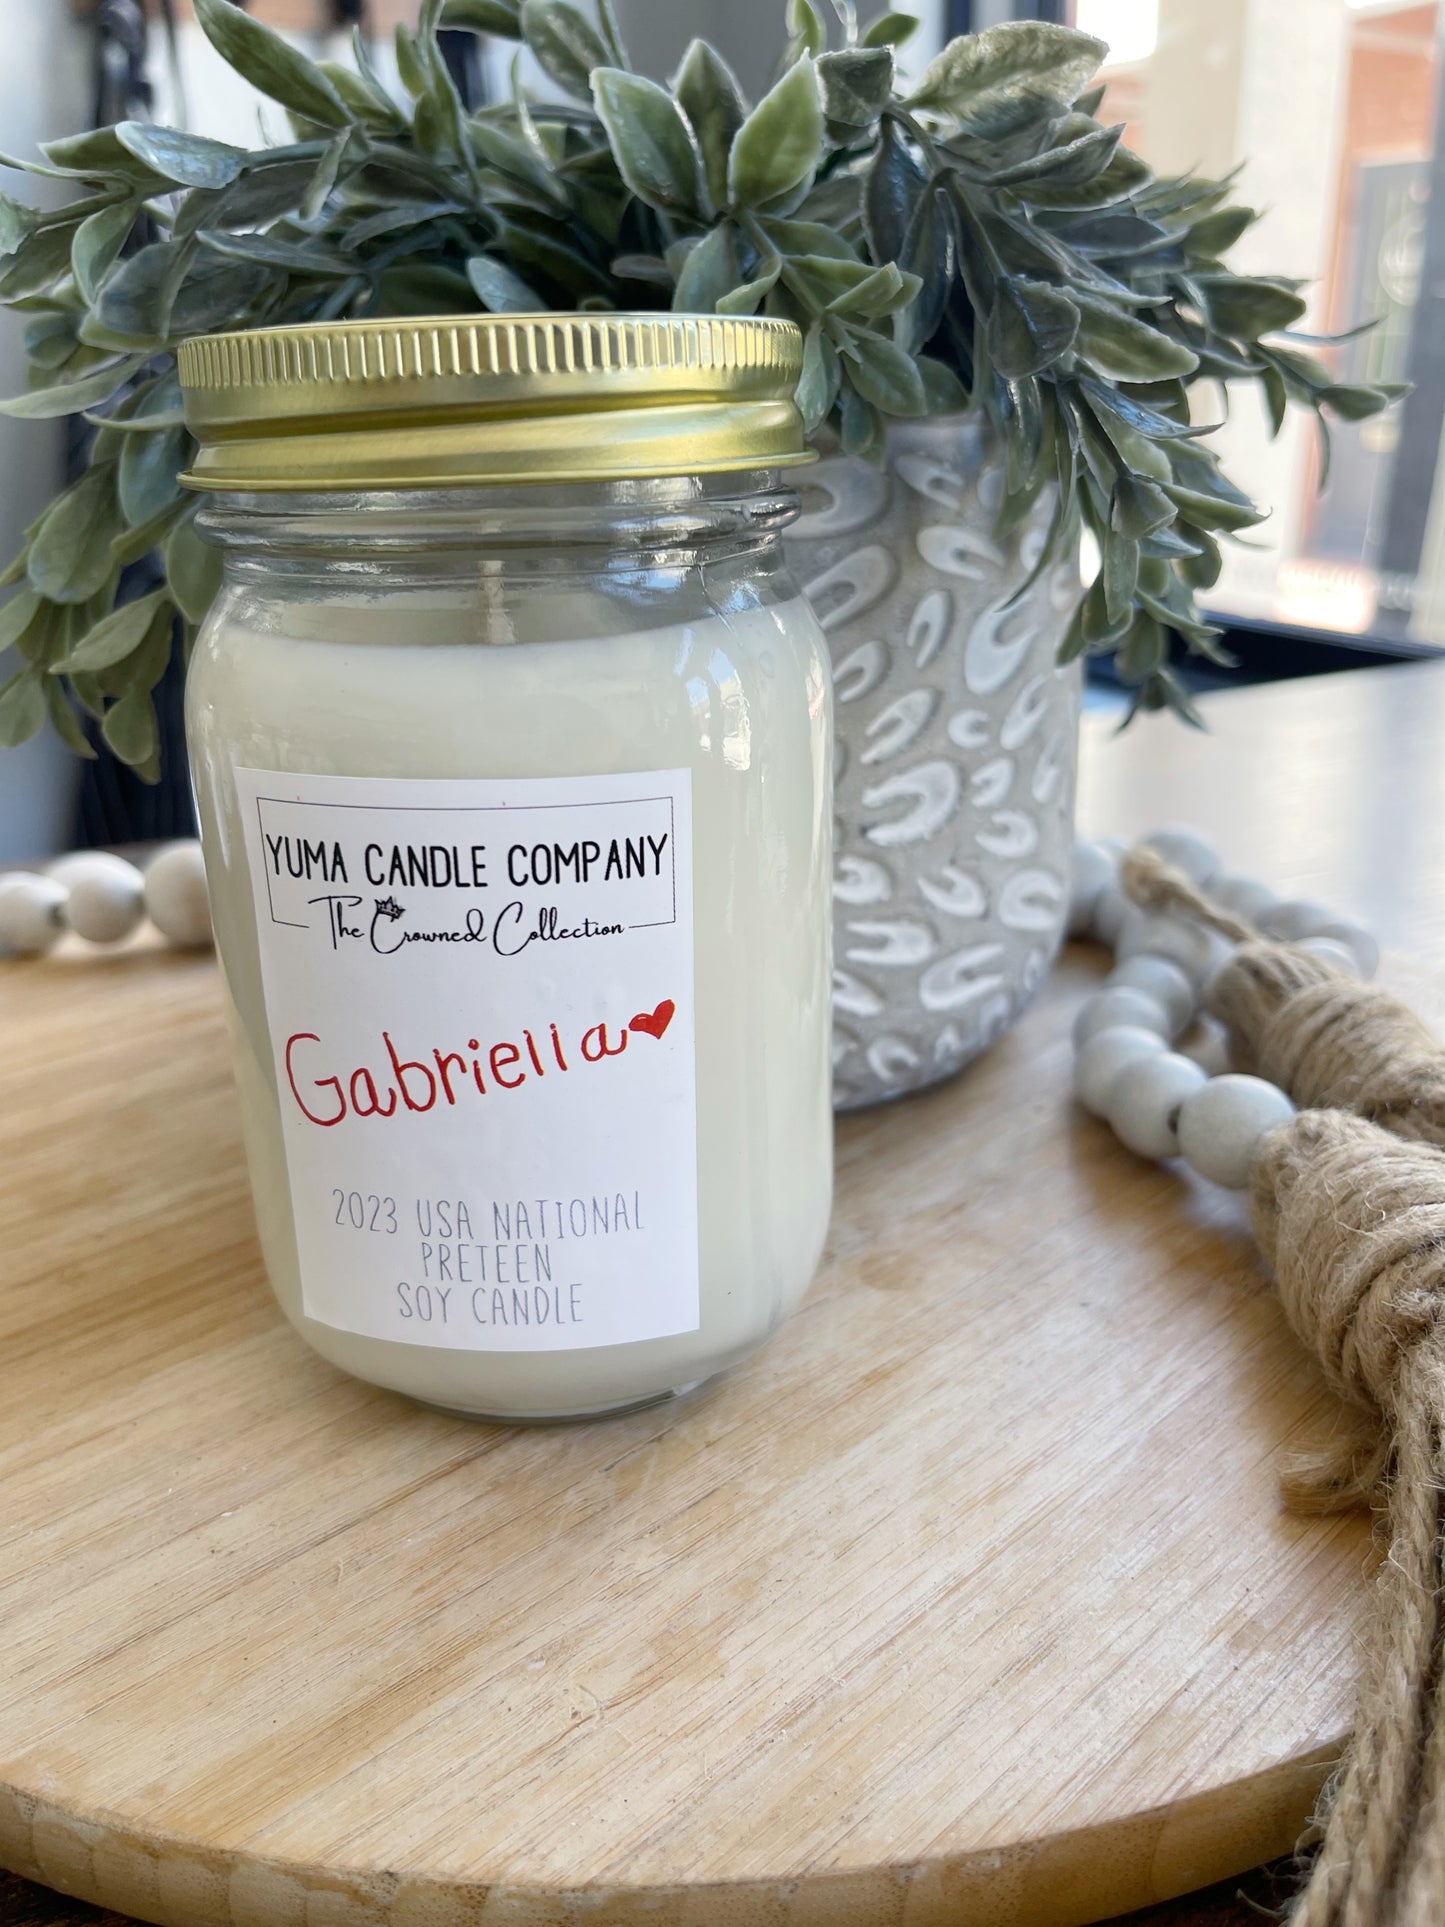 The Gabriella - Sweet Serenity Soy Candle